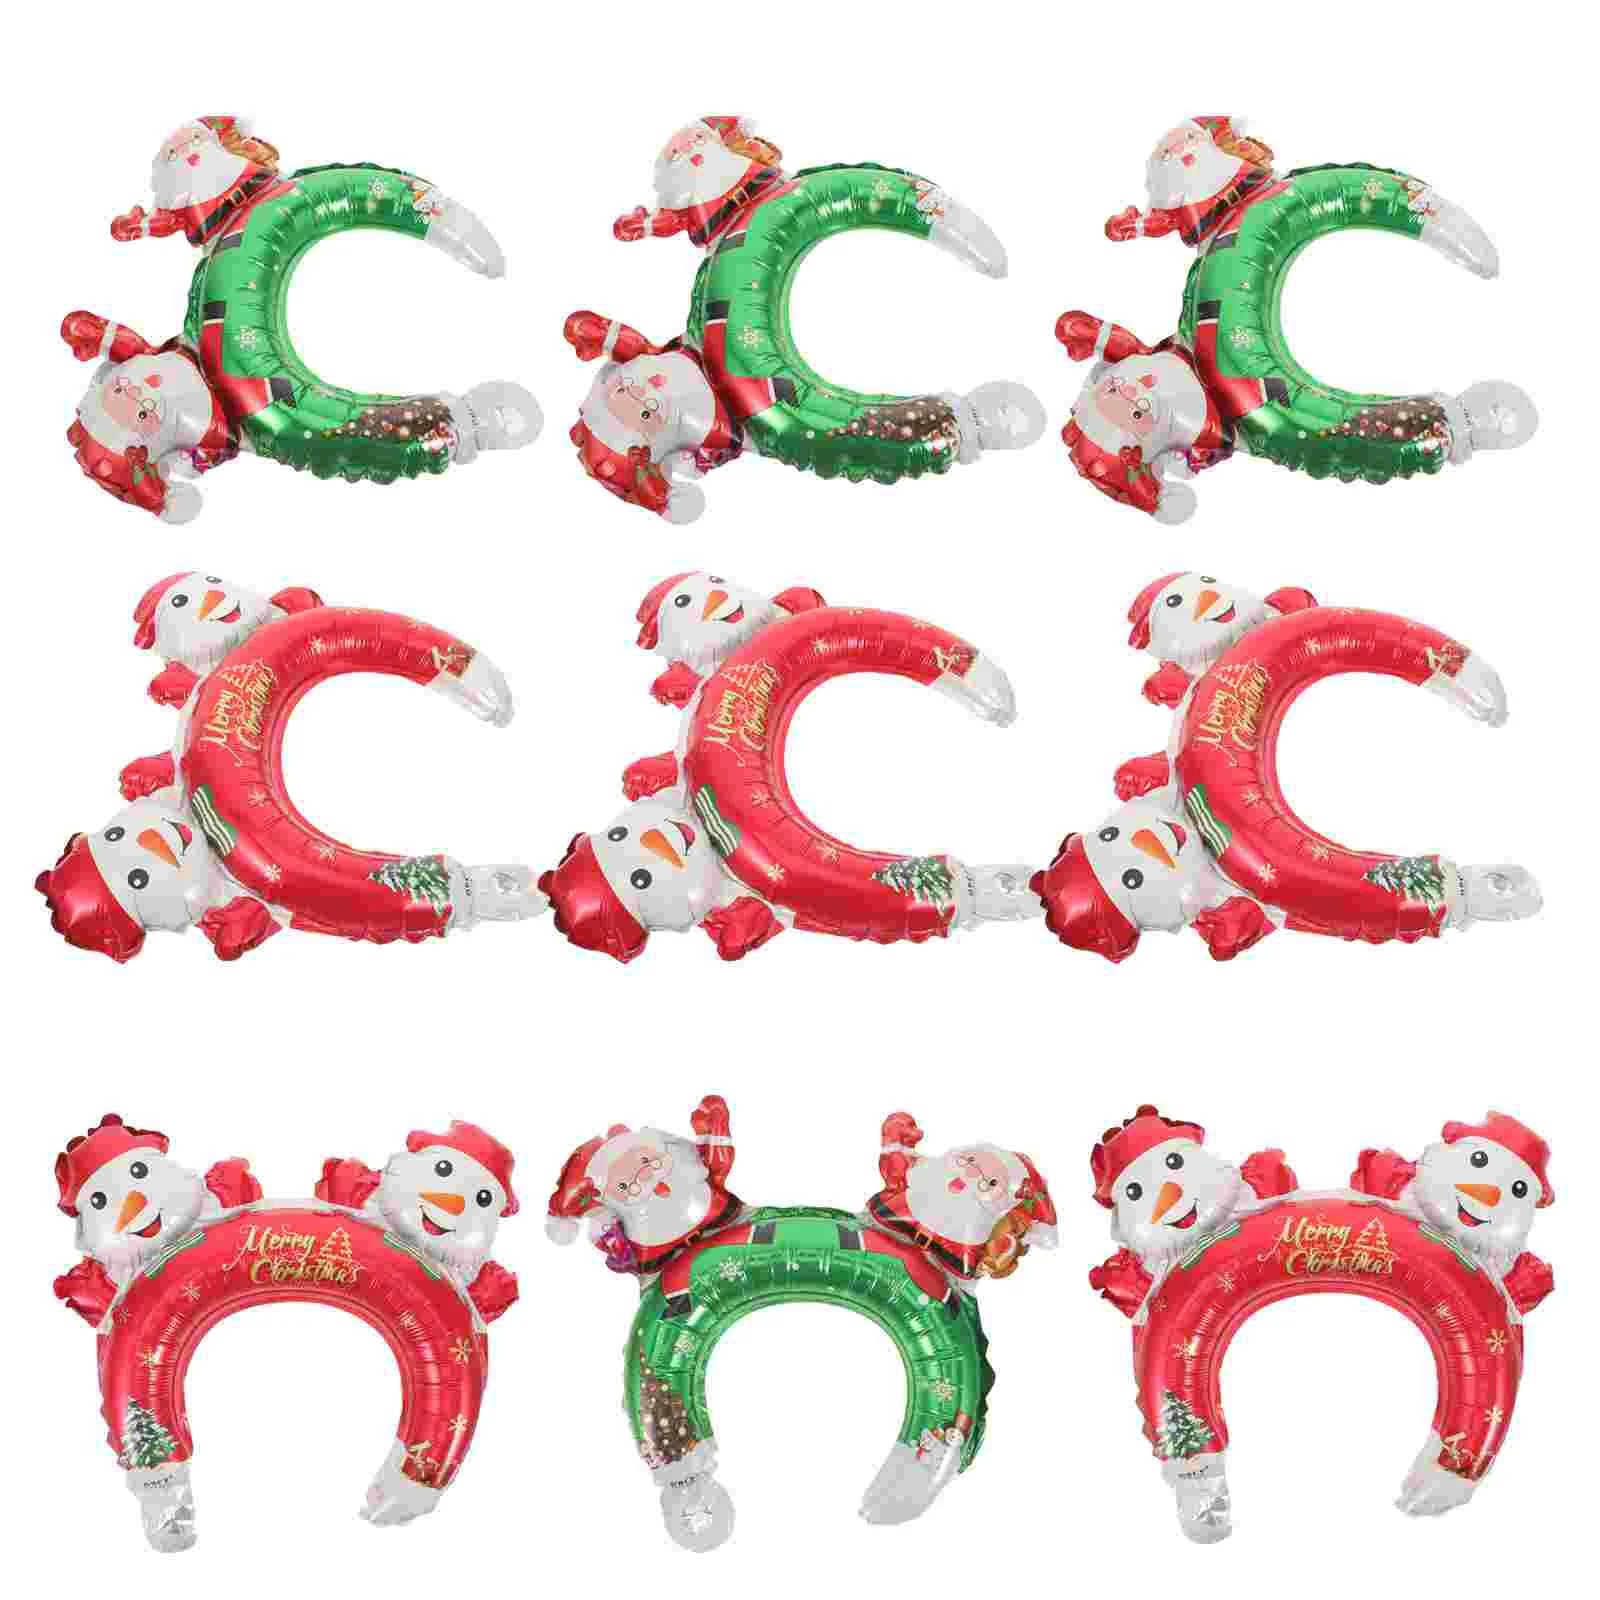 

20 Pcs The Gift Mini Balloons Headgear Hair Hoops Party Favors Kids Aluminum Film Hairbands Decorations Child